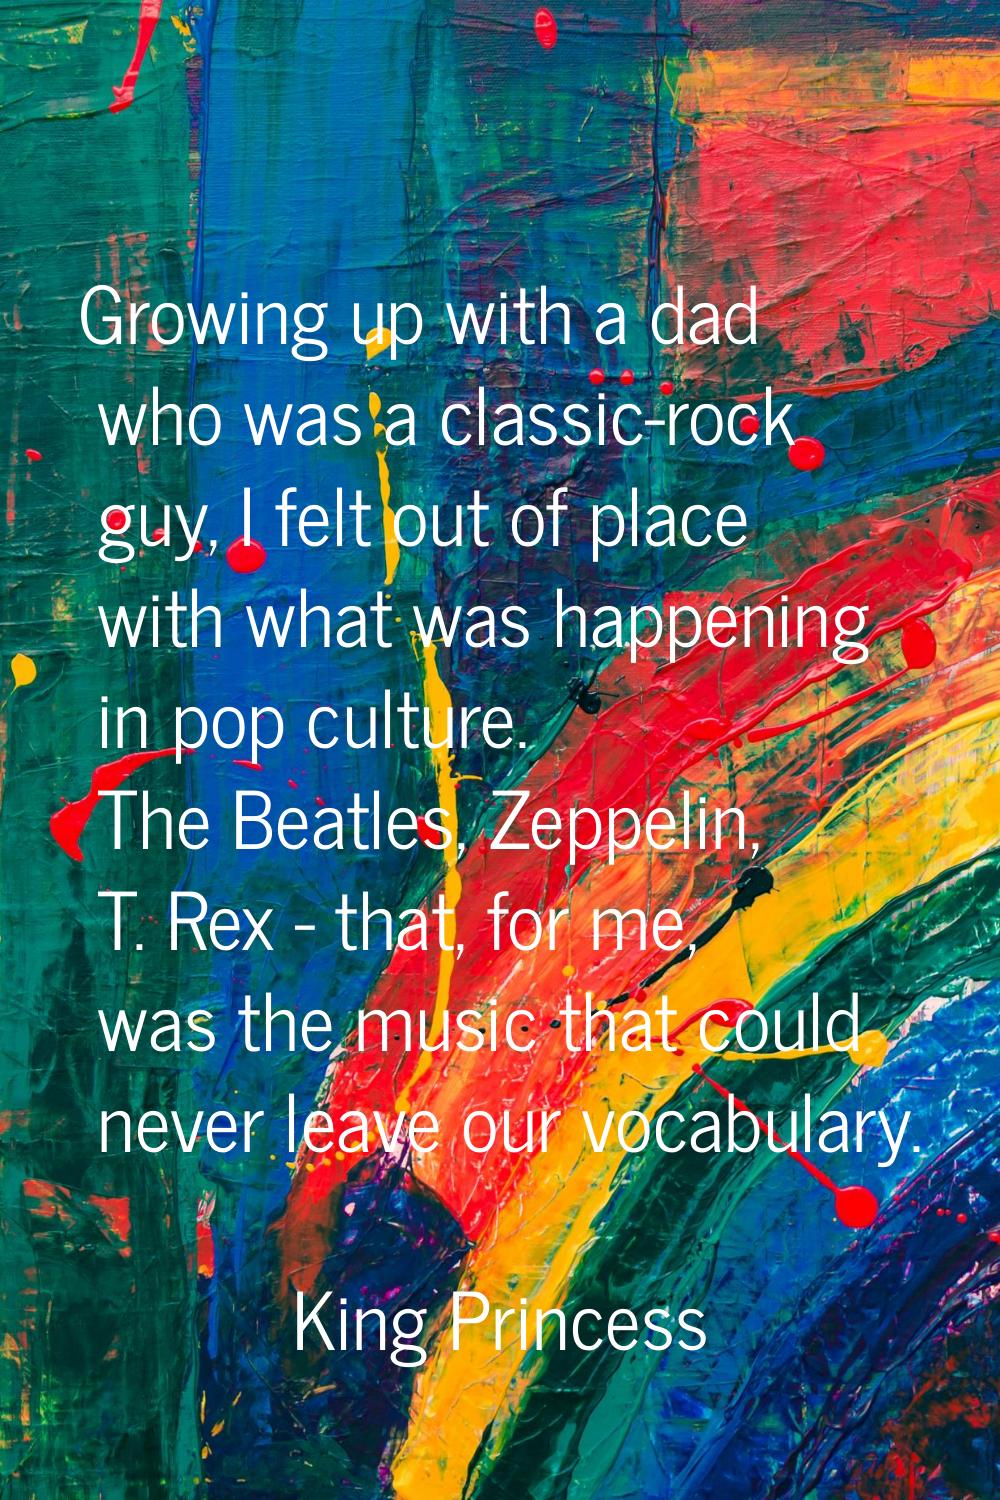 Growing up with a dad who was a classic-rock guy, I felt out of place with what was happening in po